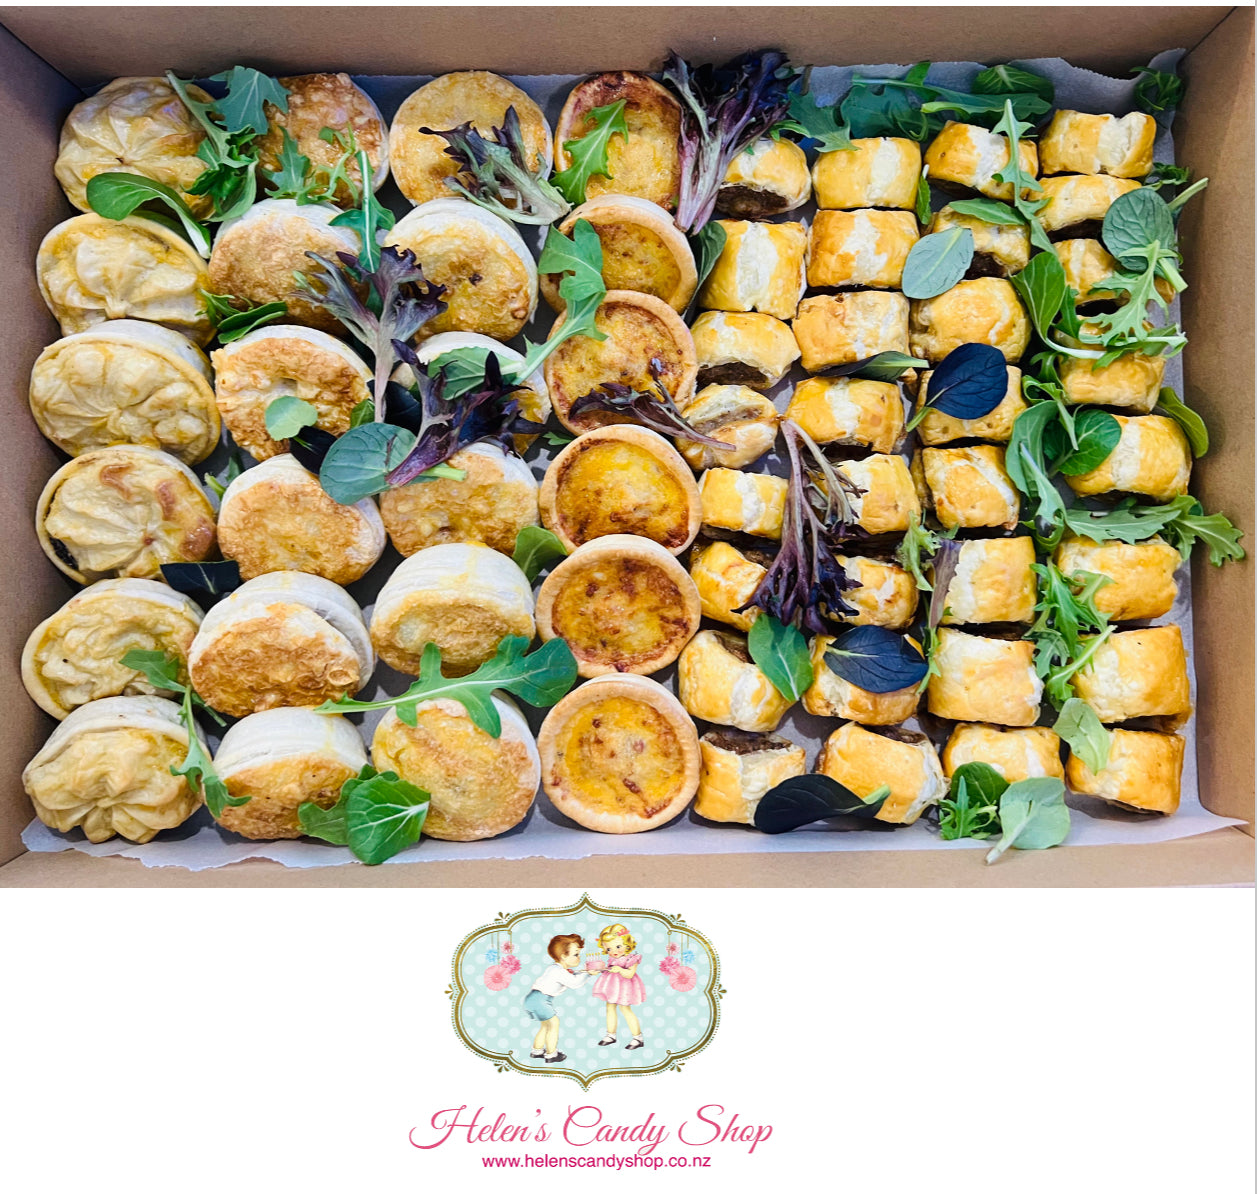 Mini Pastry & Sausage Roll Platter